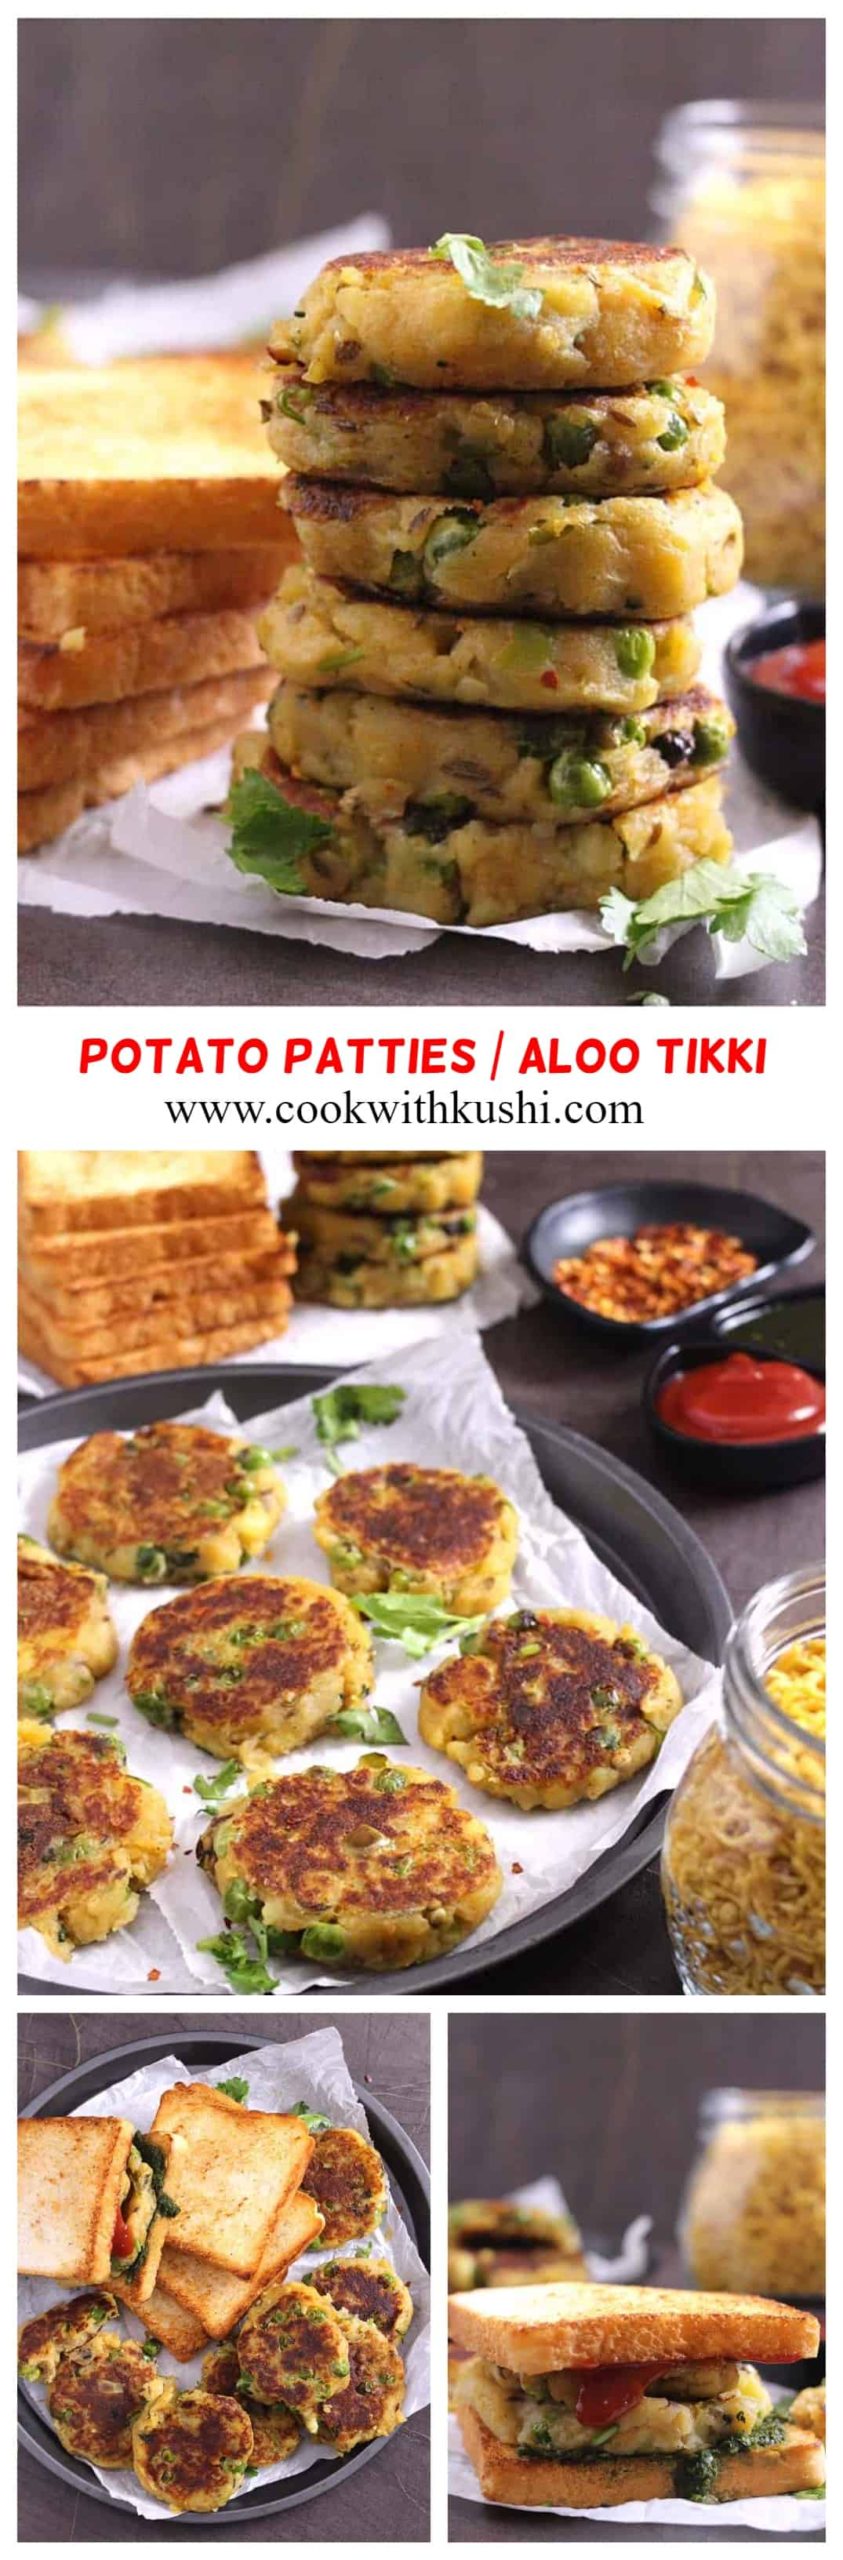 Aloo Tikki or Potato patties are quick and simple, easy to make snack recipe prepared using potatoes, peas and spices. #potatoes #aloo #tikki #chaat #patties #croquette #cutlet #mashedpotatoes #Leftovers